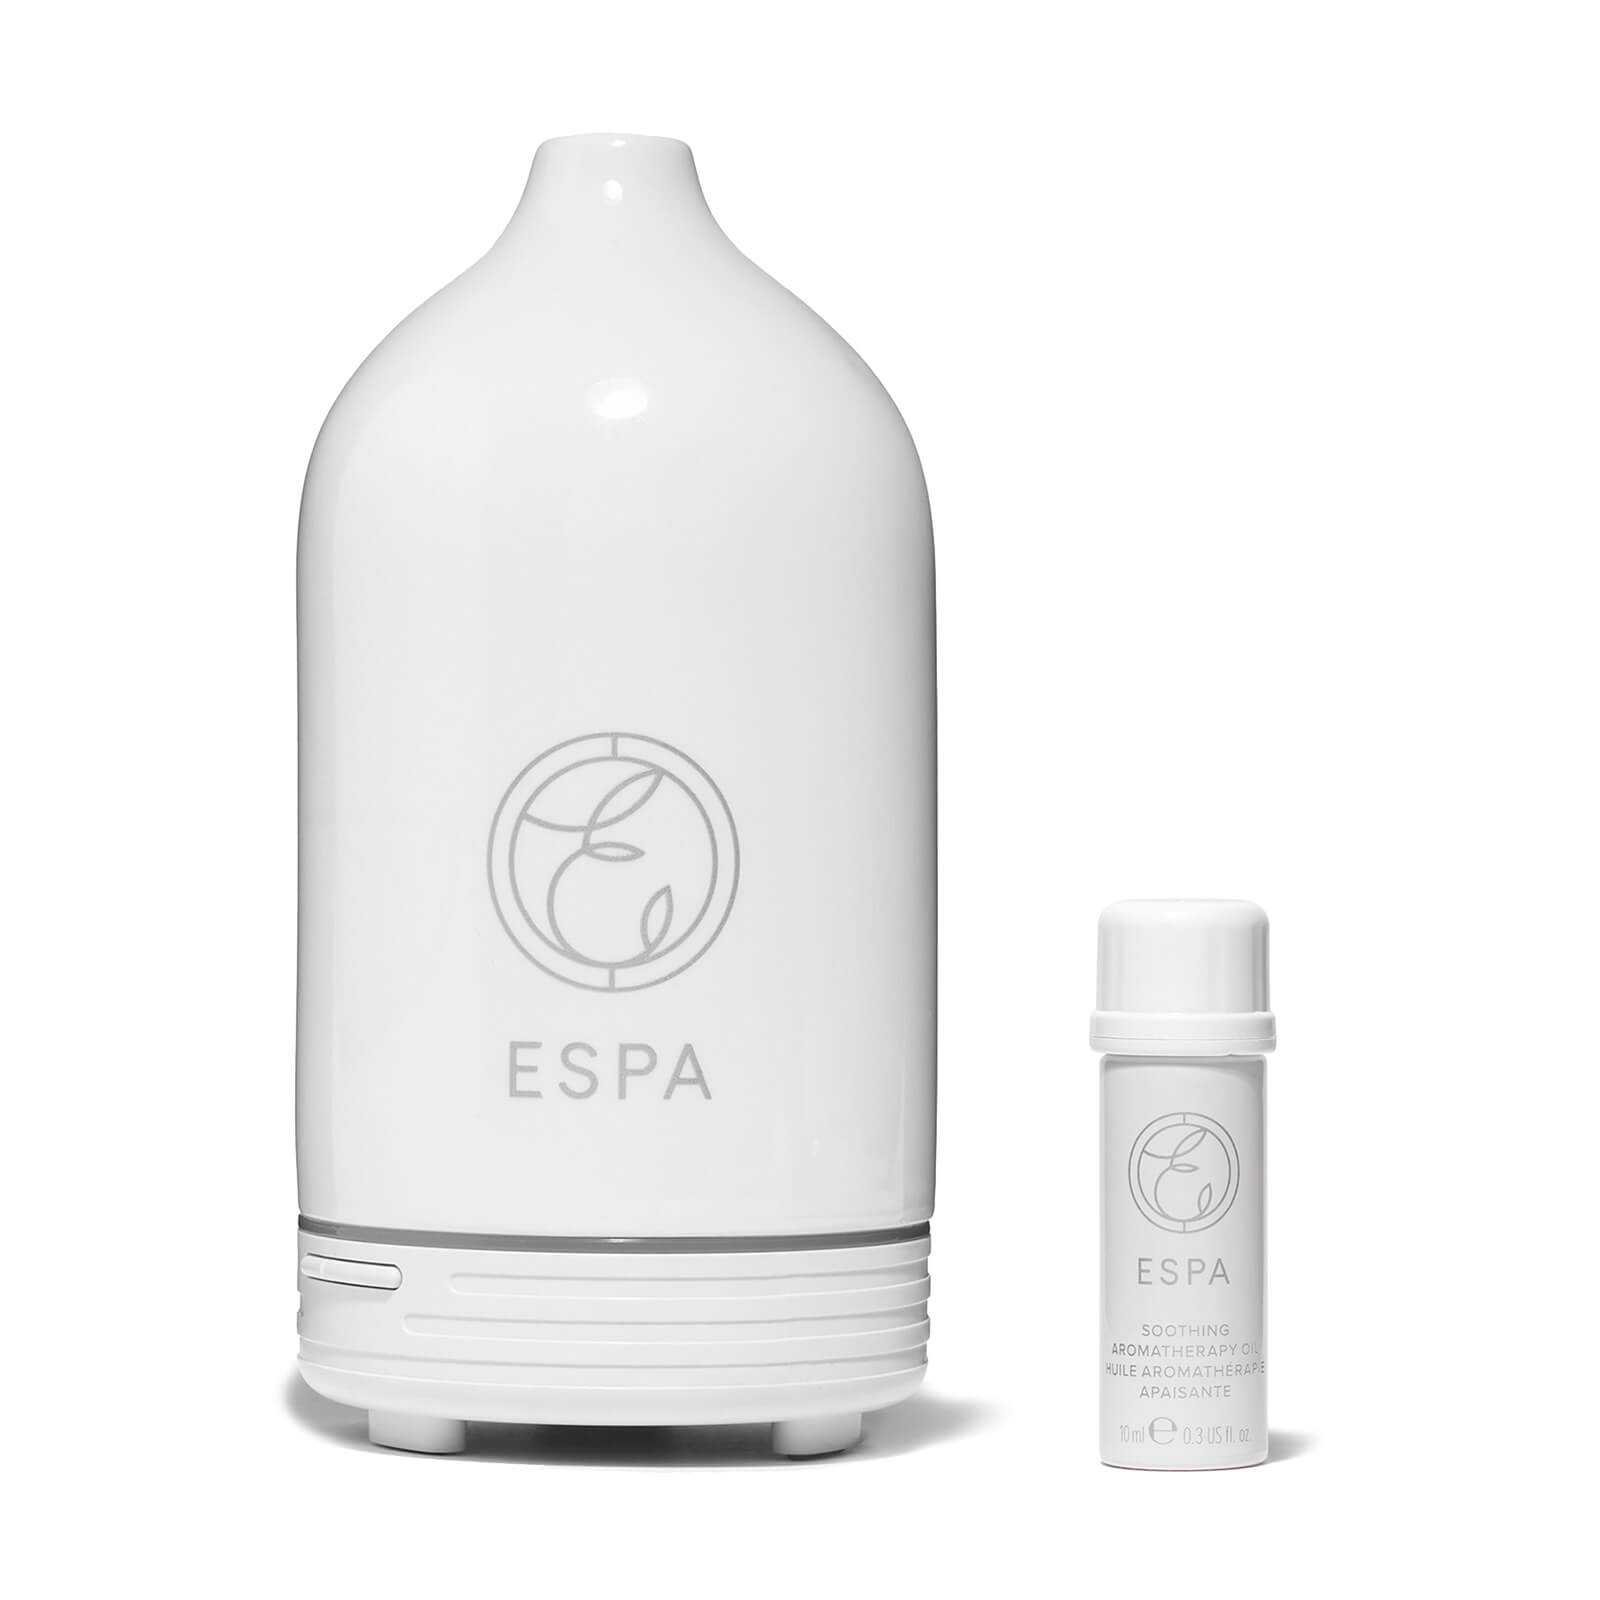 Espa Aromatherapy Essential Oil Diffuser Starter Kit - Soothing In White